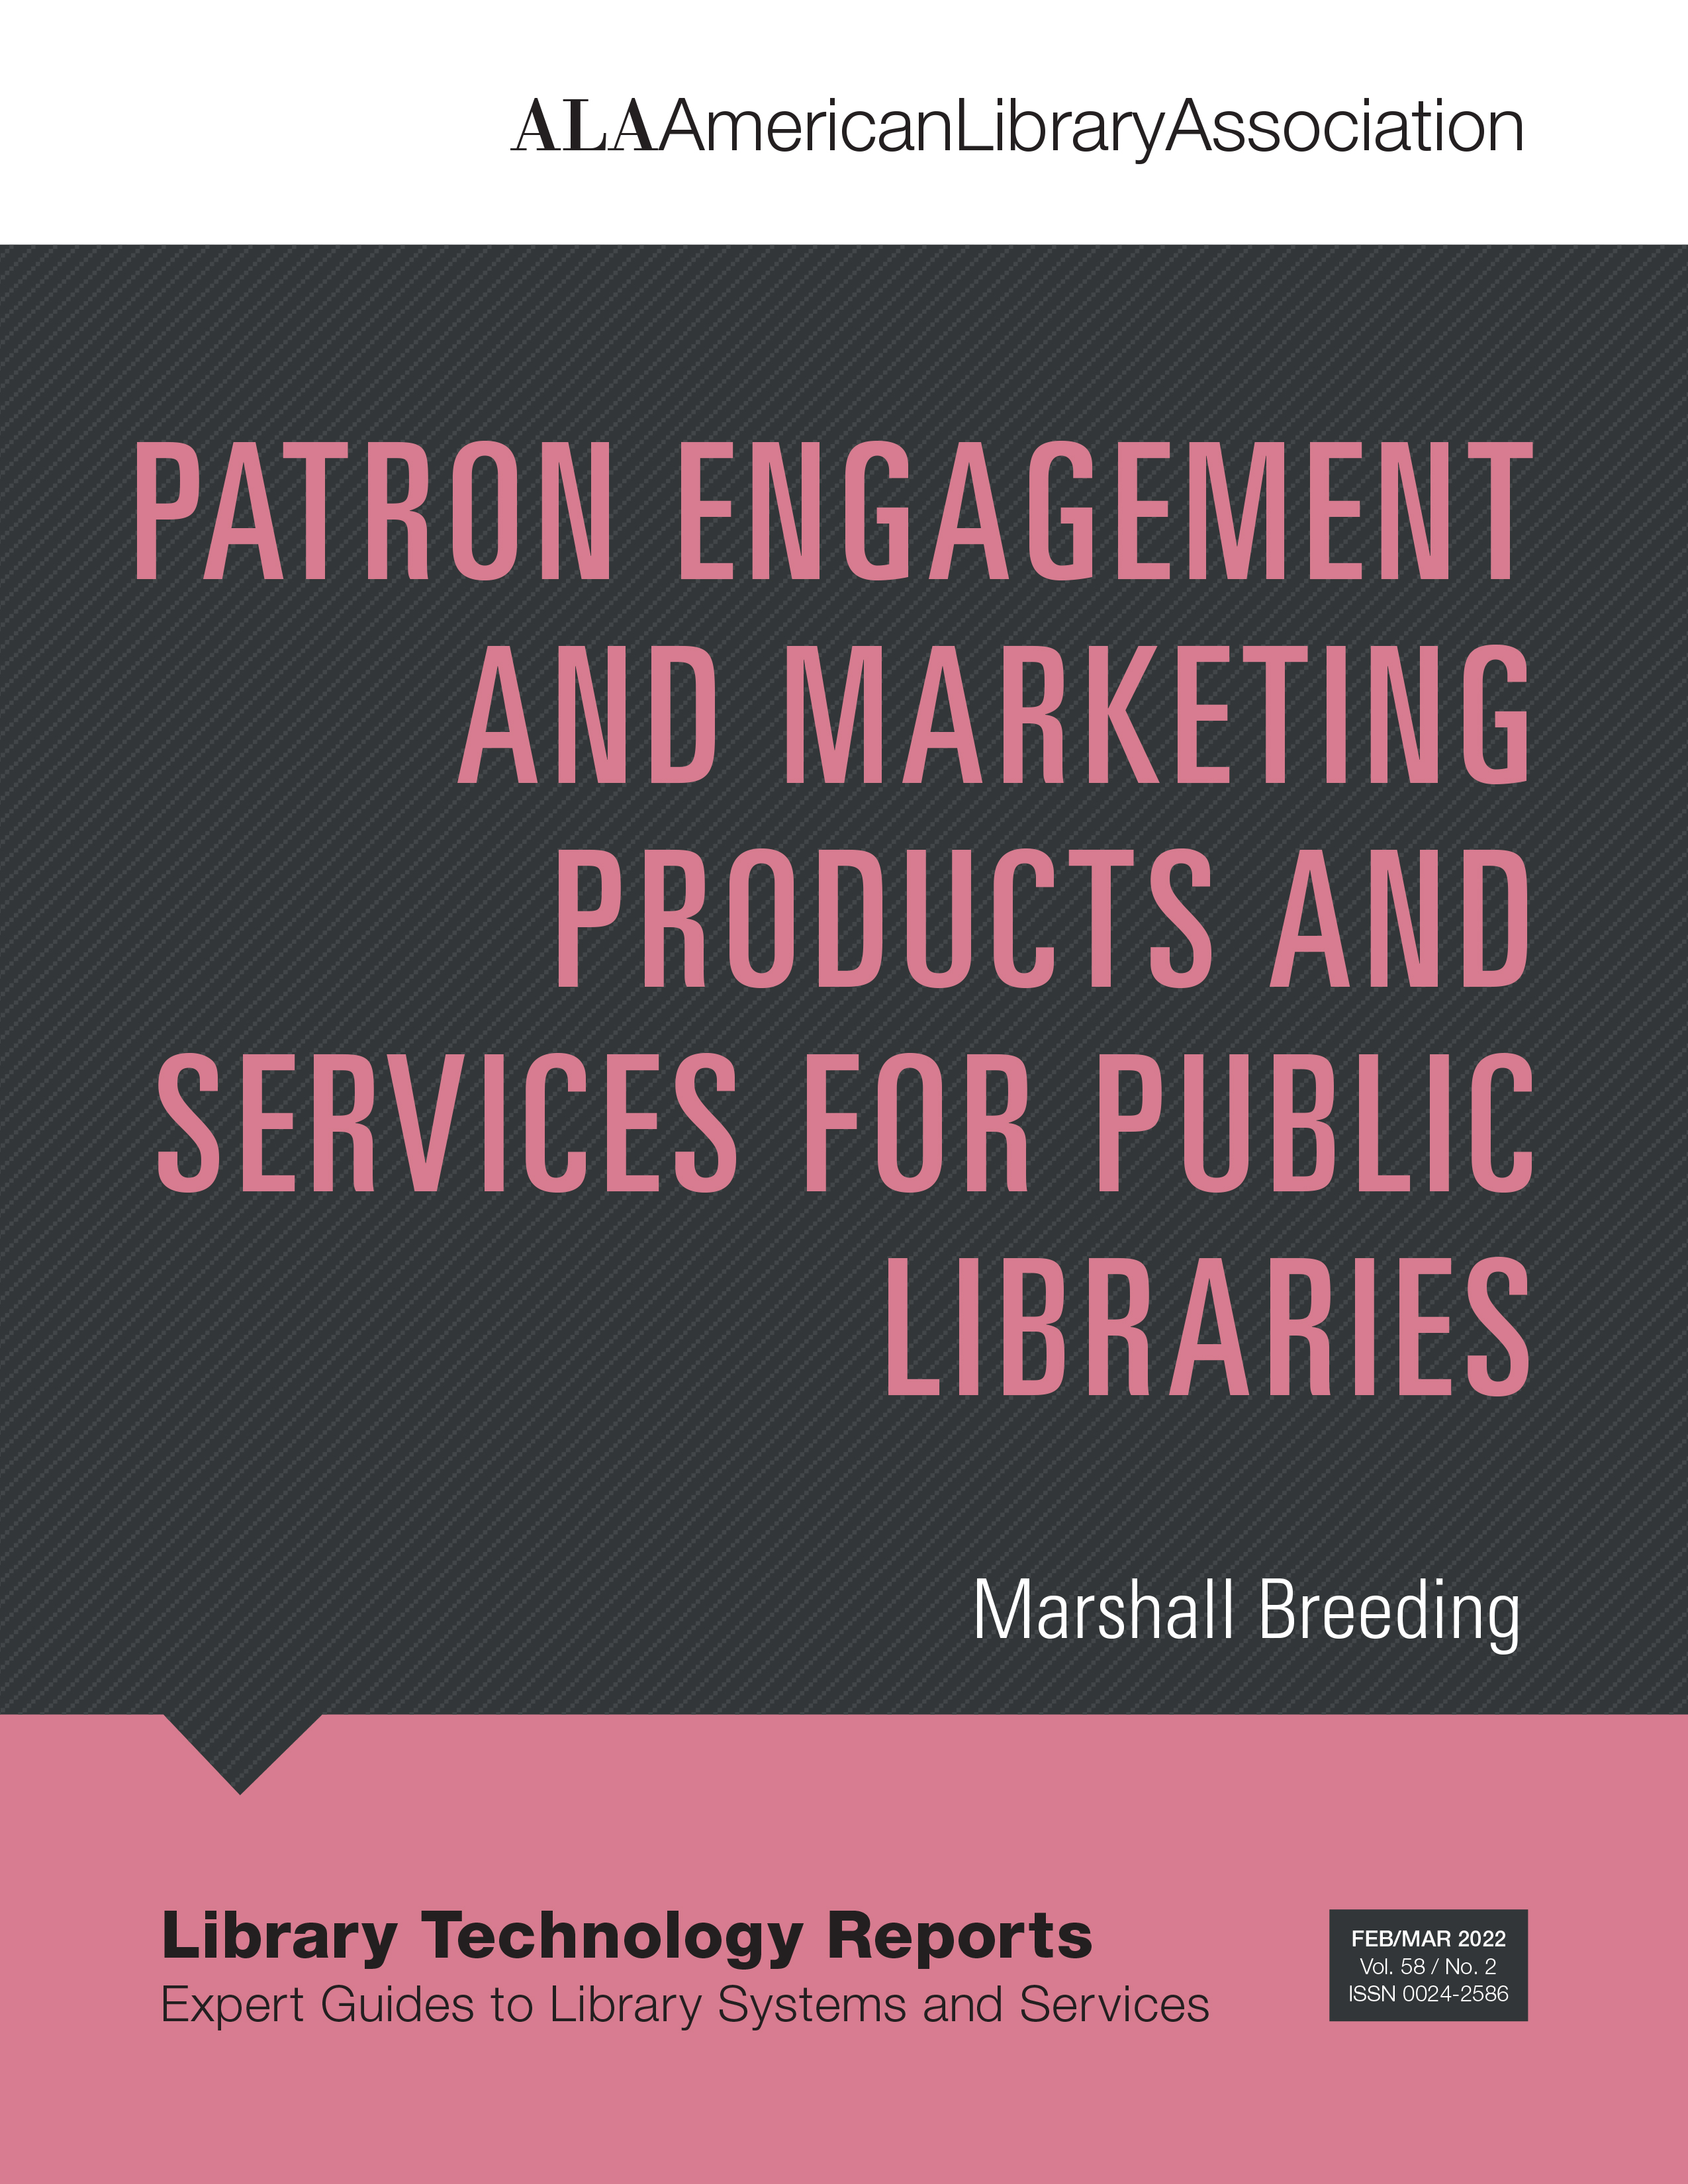 book cover for Library Technology Reports (vol. 58, no. 2), “Patron Engagement and Marketing Products and Services for Public Libraries"